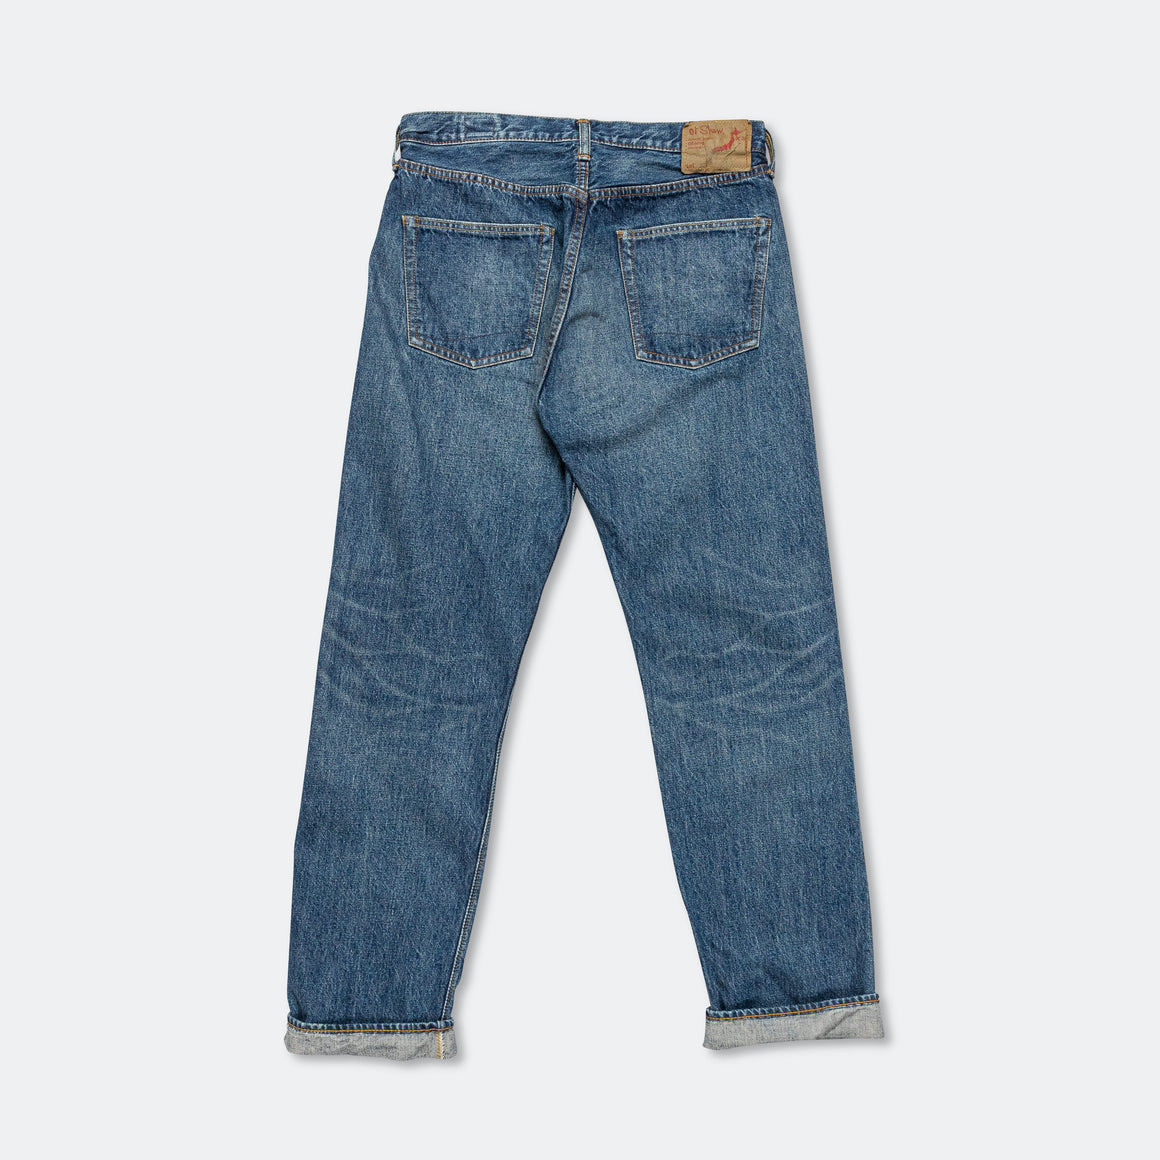 orSlow - 105 Standard Selvedge Denim - 2 Year Wash - UP THERE